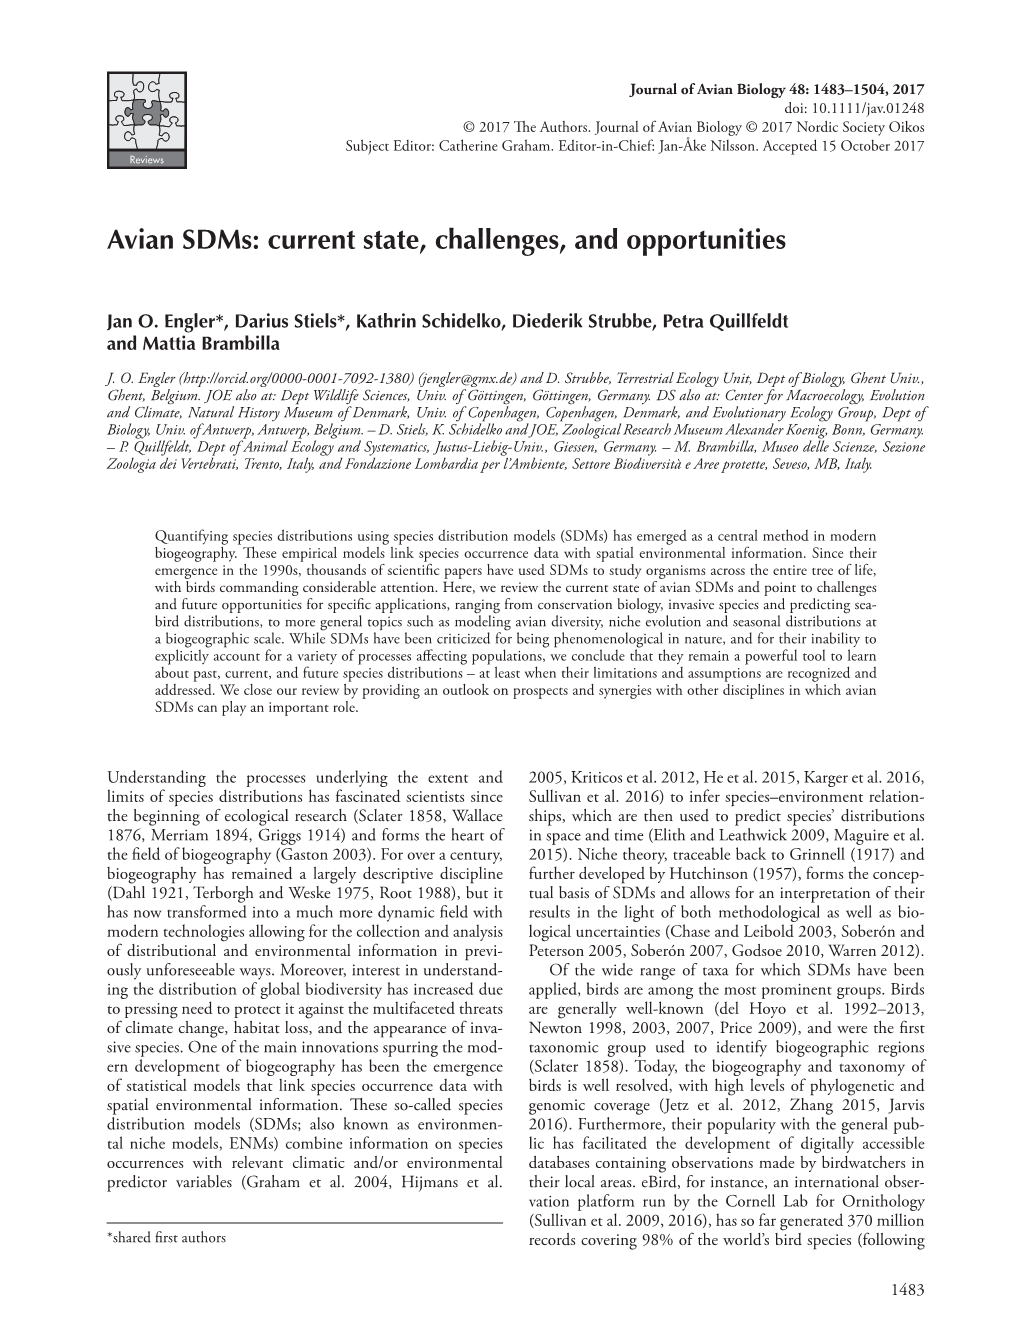 Avian Sdms: Current State, Challenges, and Opportunities